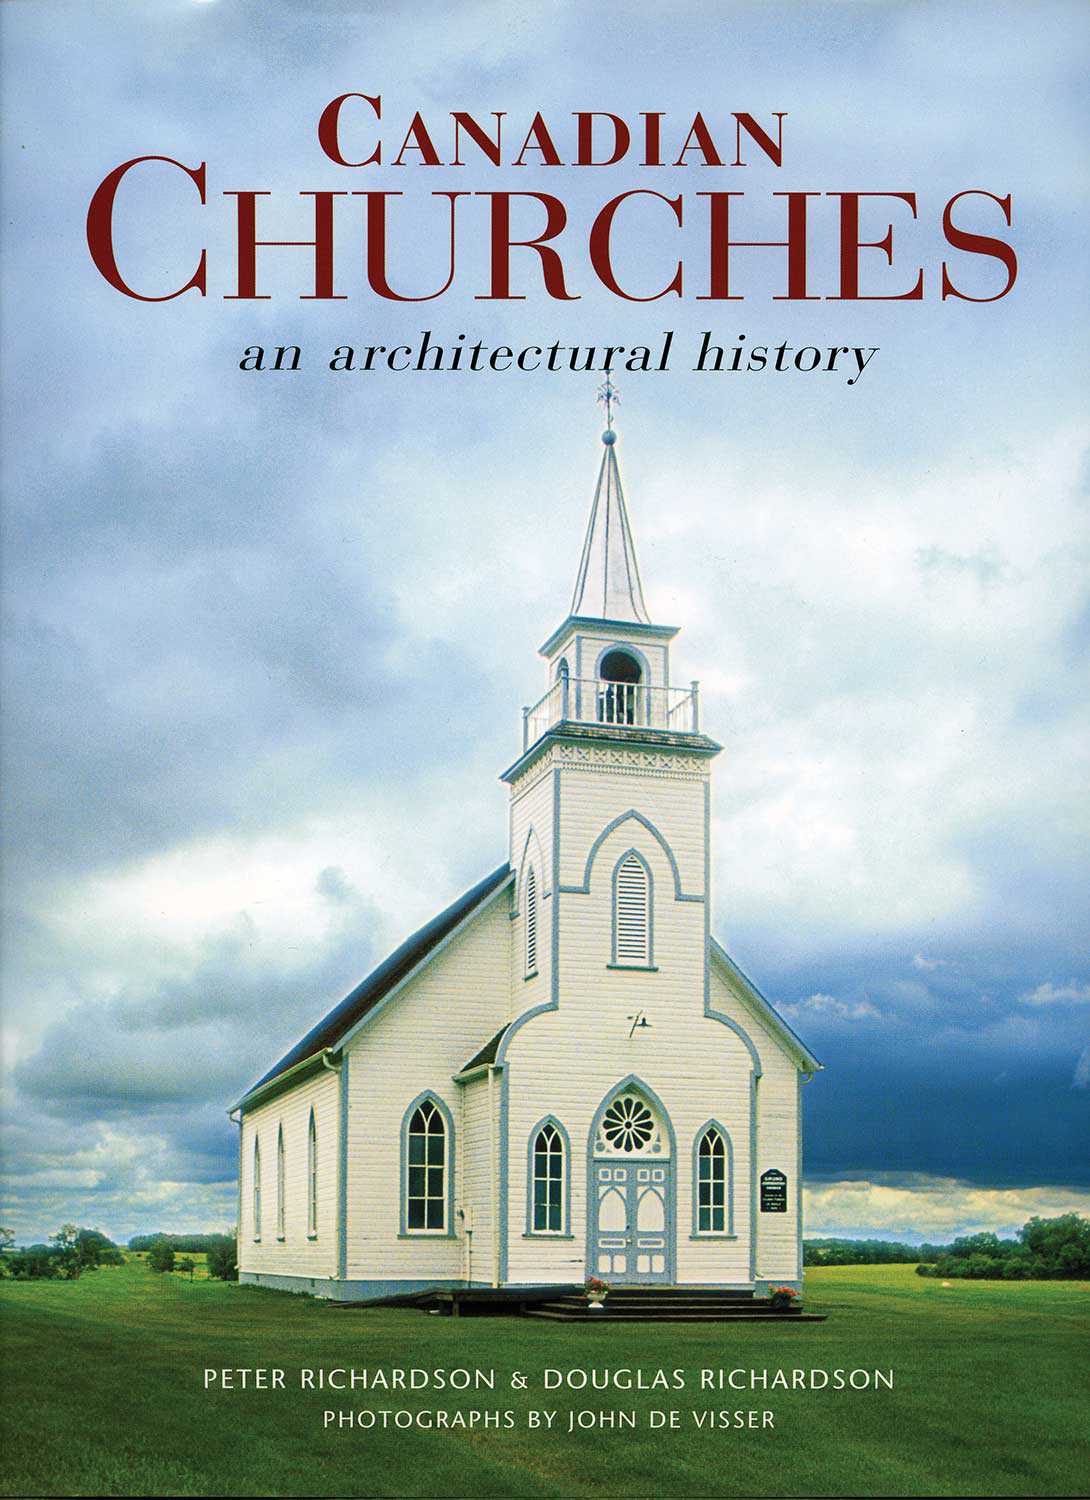 Canadian Churches: An architectural history, by Peter Richardson and Douglas Richardson, with photographs by John de Visser